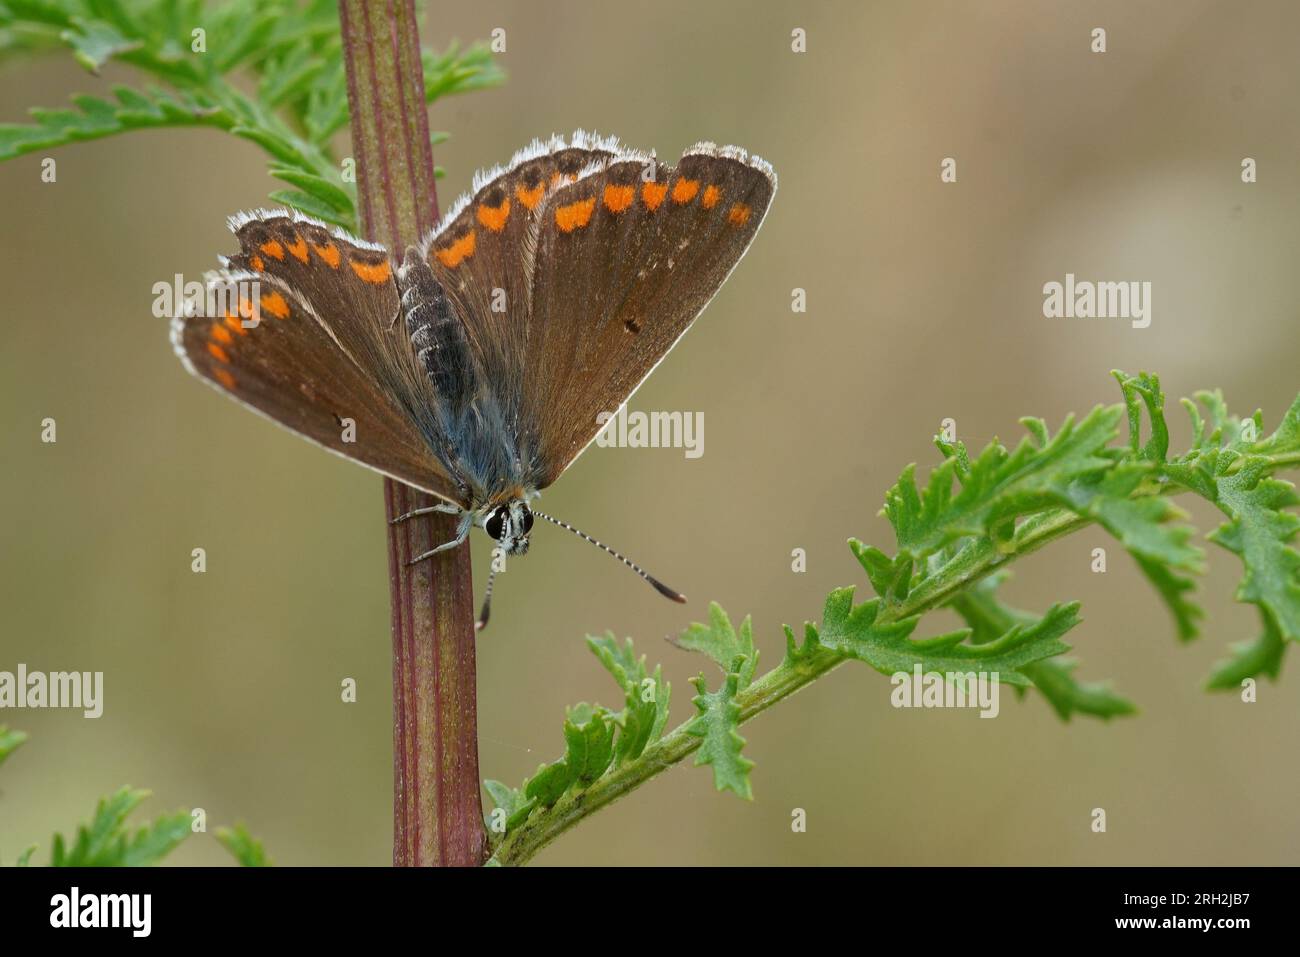 Natural closeup on a small Brown argus butterfly , Aricia agestis sunbathing with open wings Stock Photo